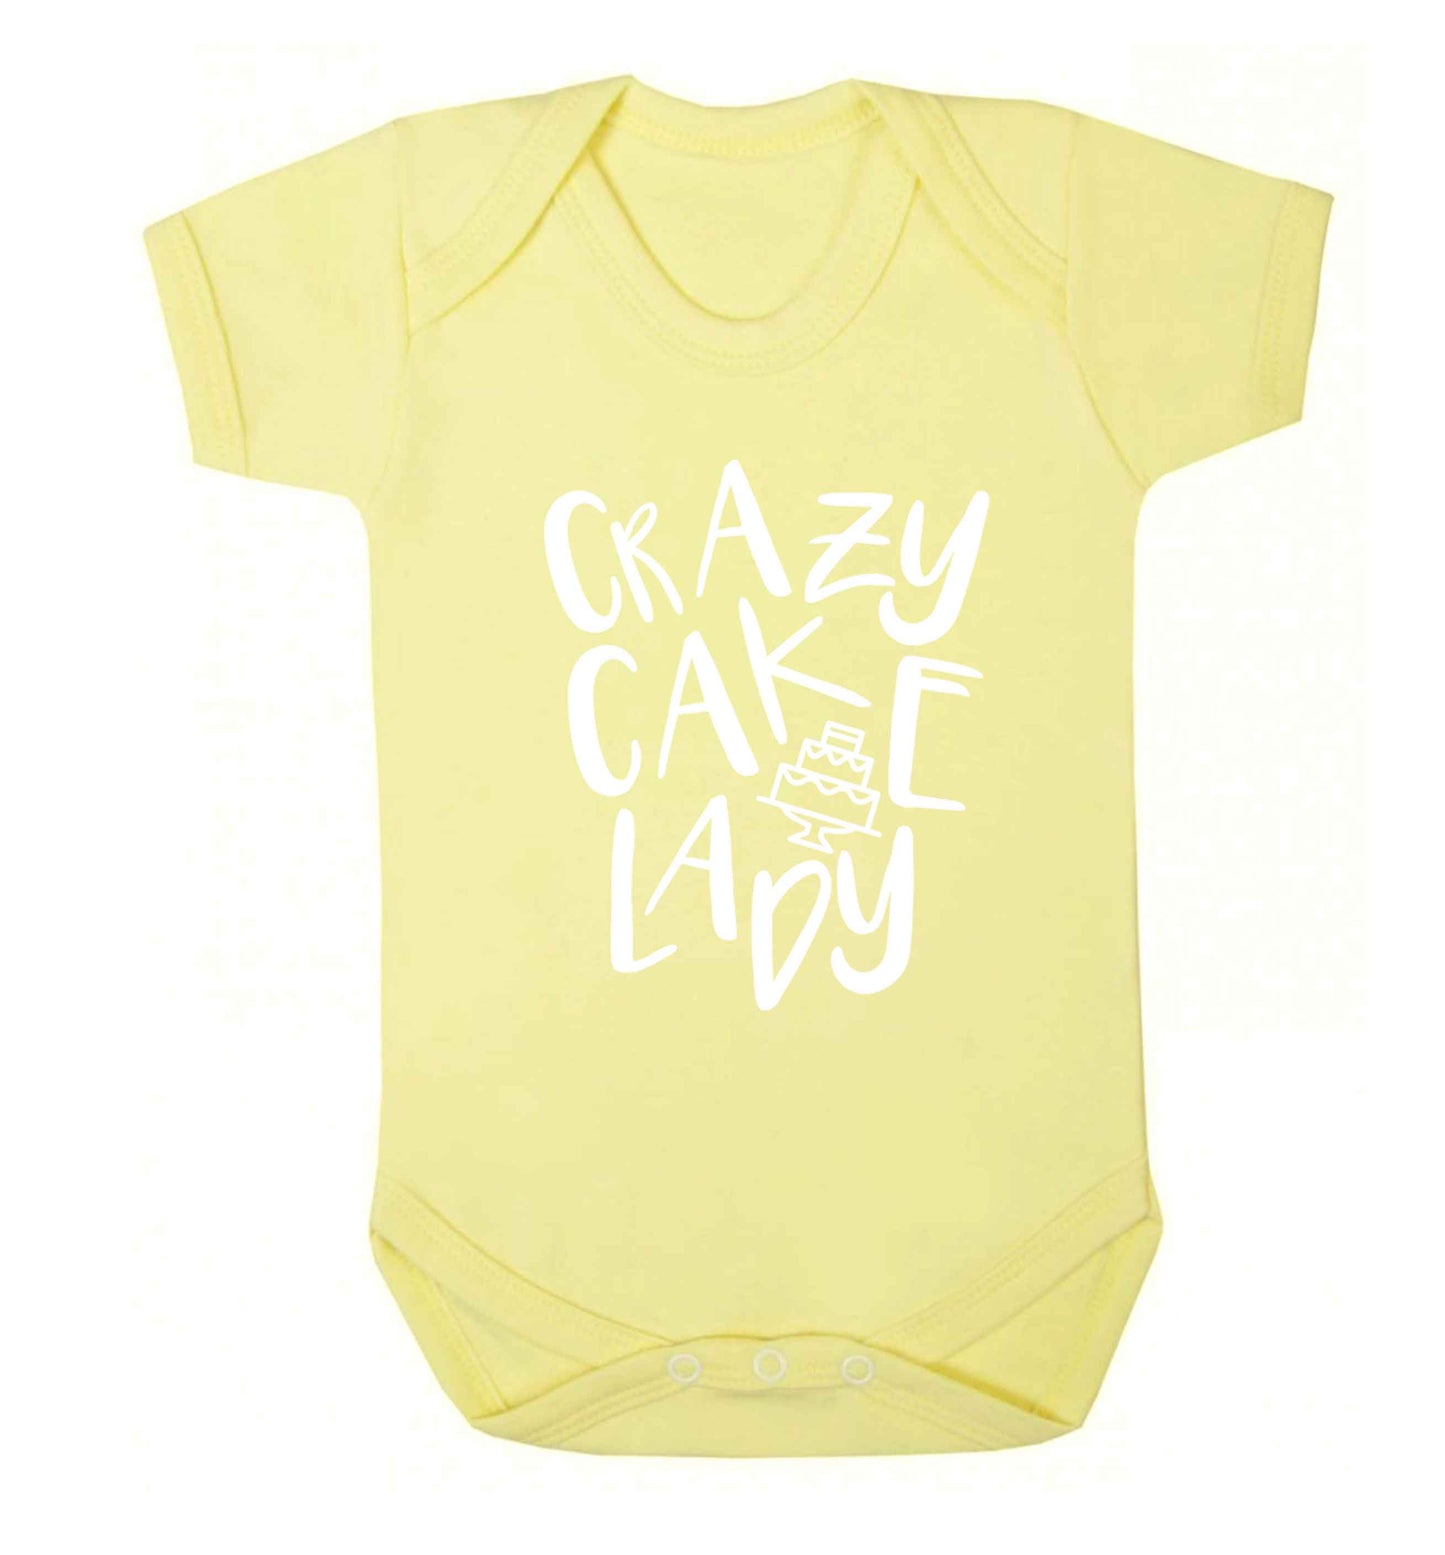 Crazy cake lady Baby Vest pale yellow 18-24 months